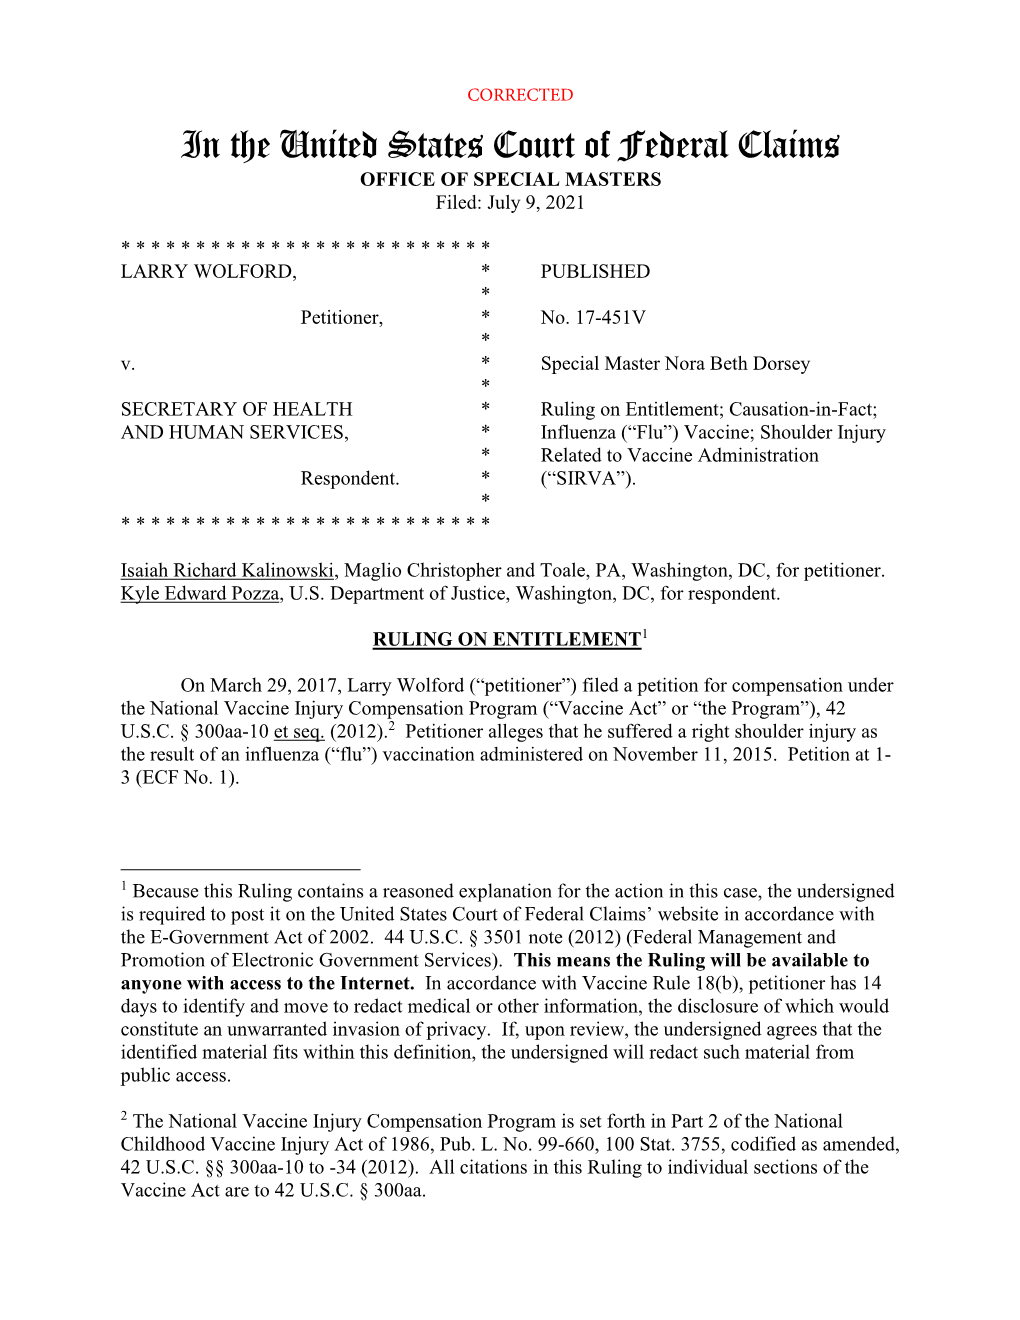 In the United States Court of Federal Claims OFFICE of SPECIAL MASTERS Filed: July 9, 2021